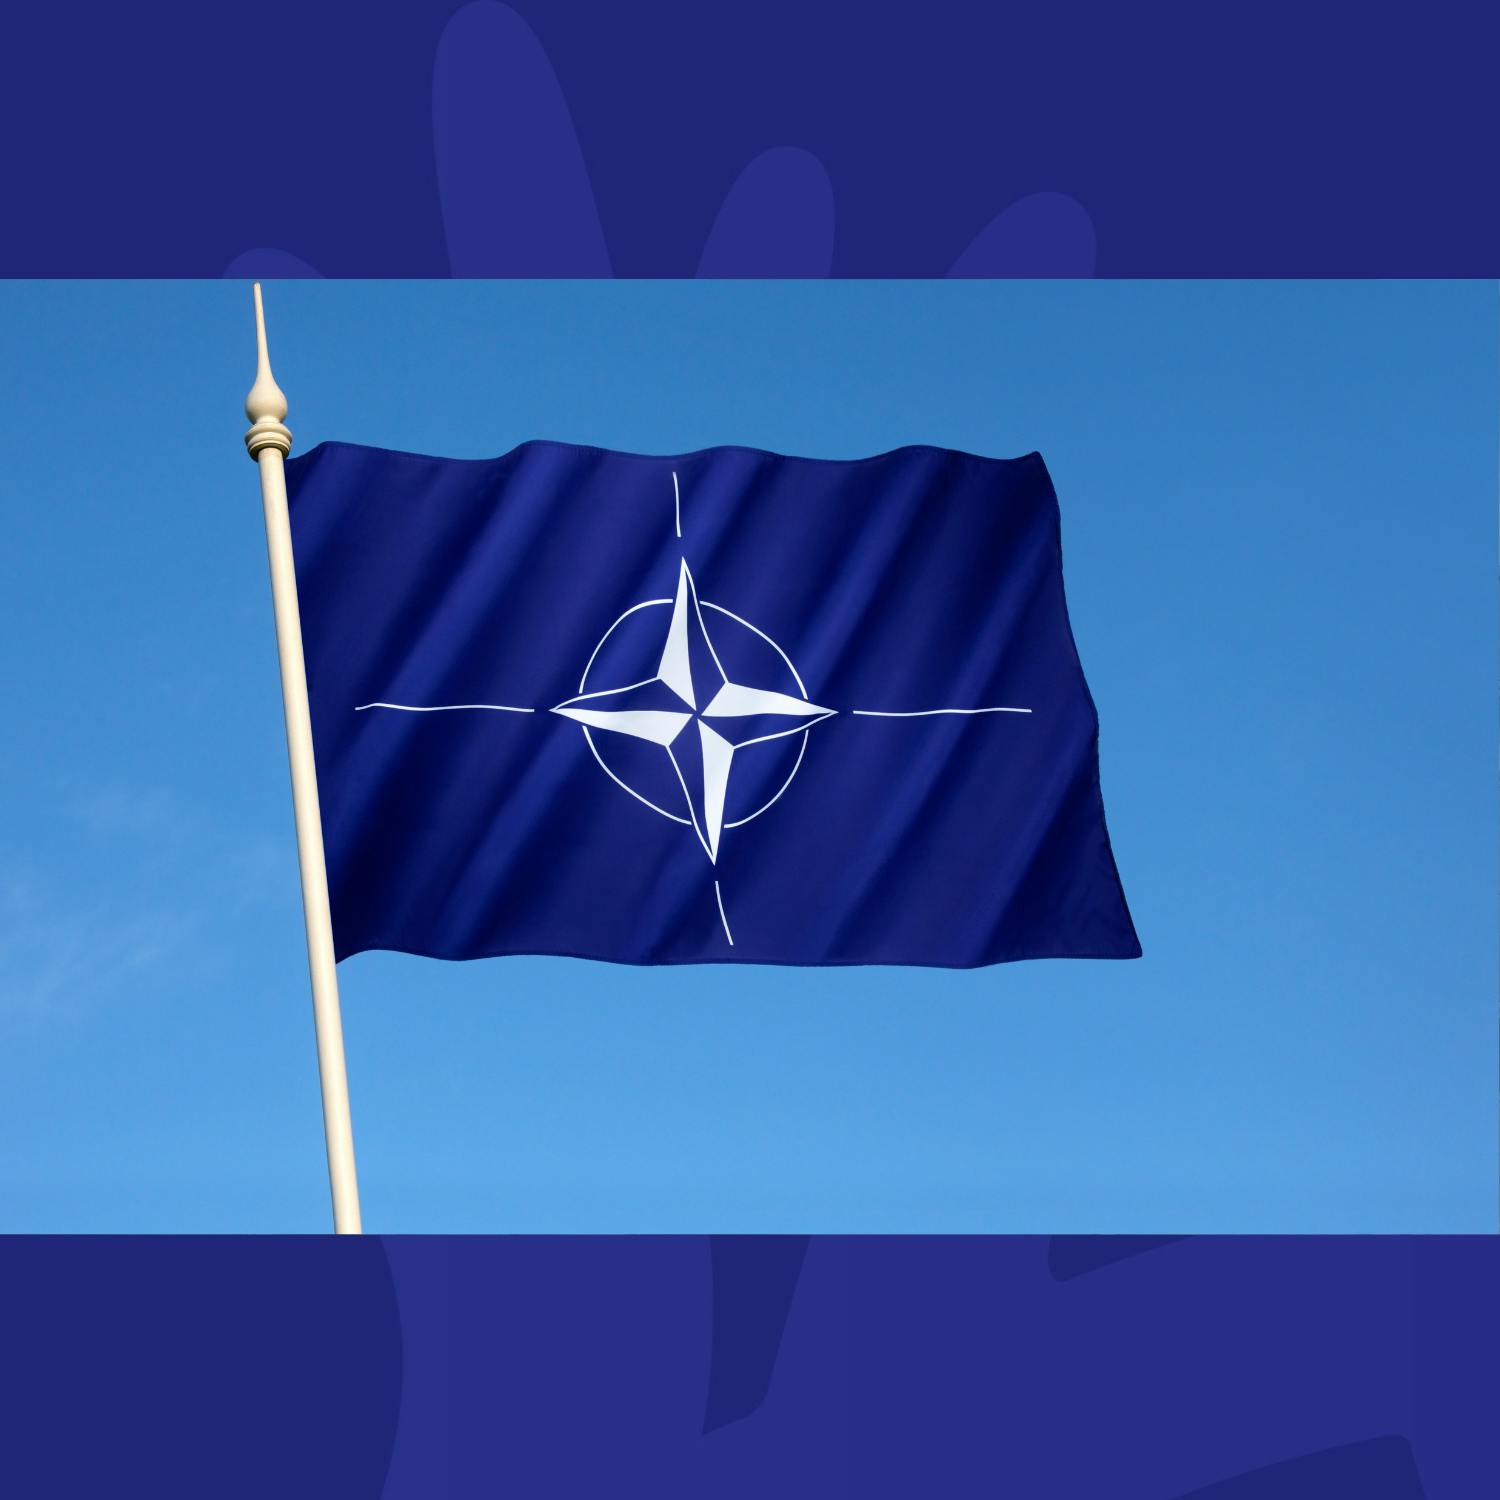 Ireland And NATO Enter New Agreement To Counter Threats Posed By Russia